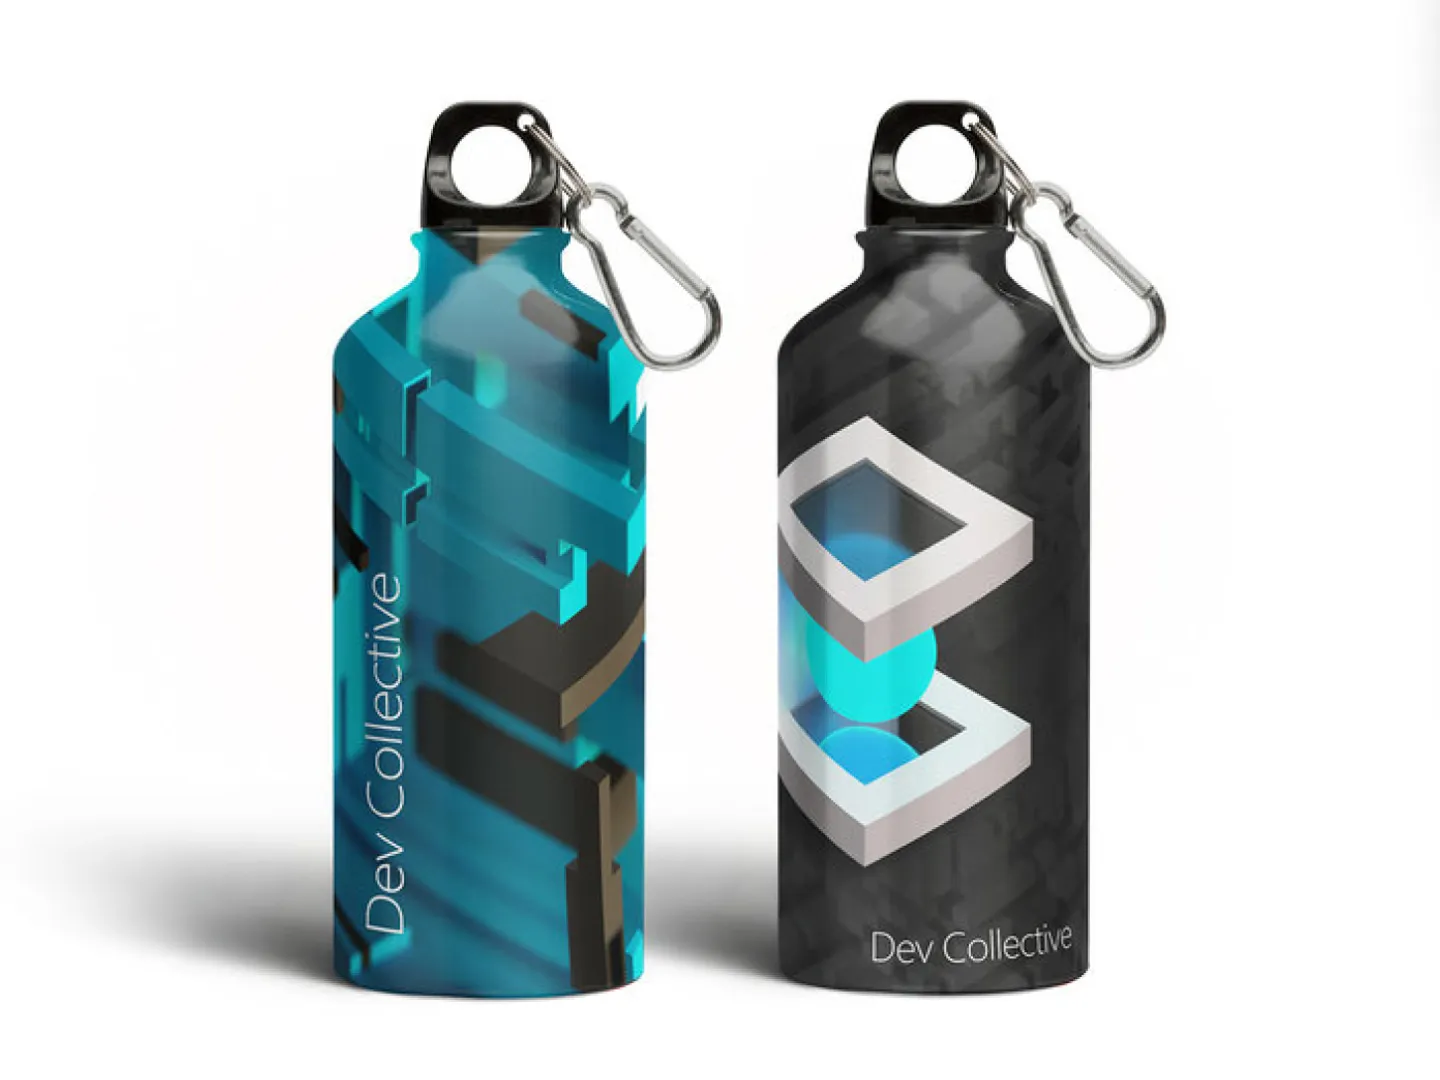 Two water bottles designed with Dev Collective branding